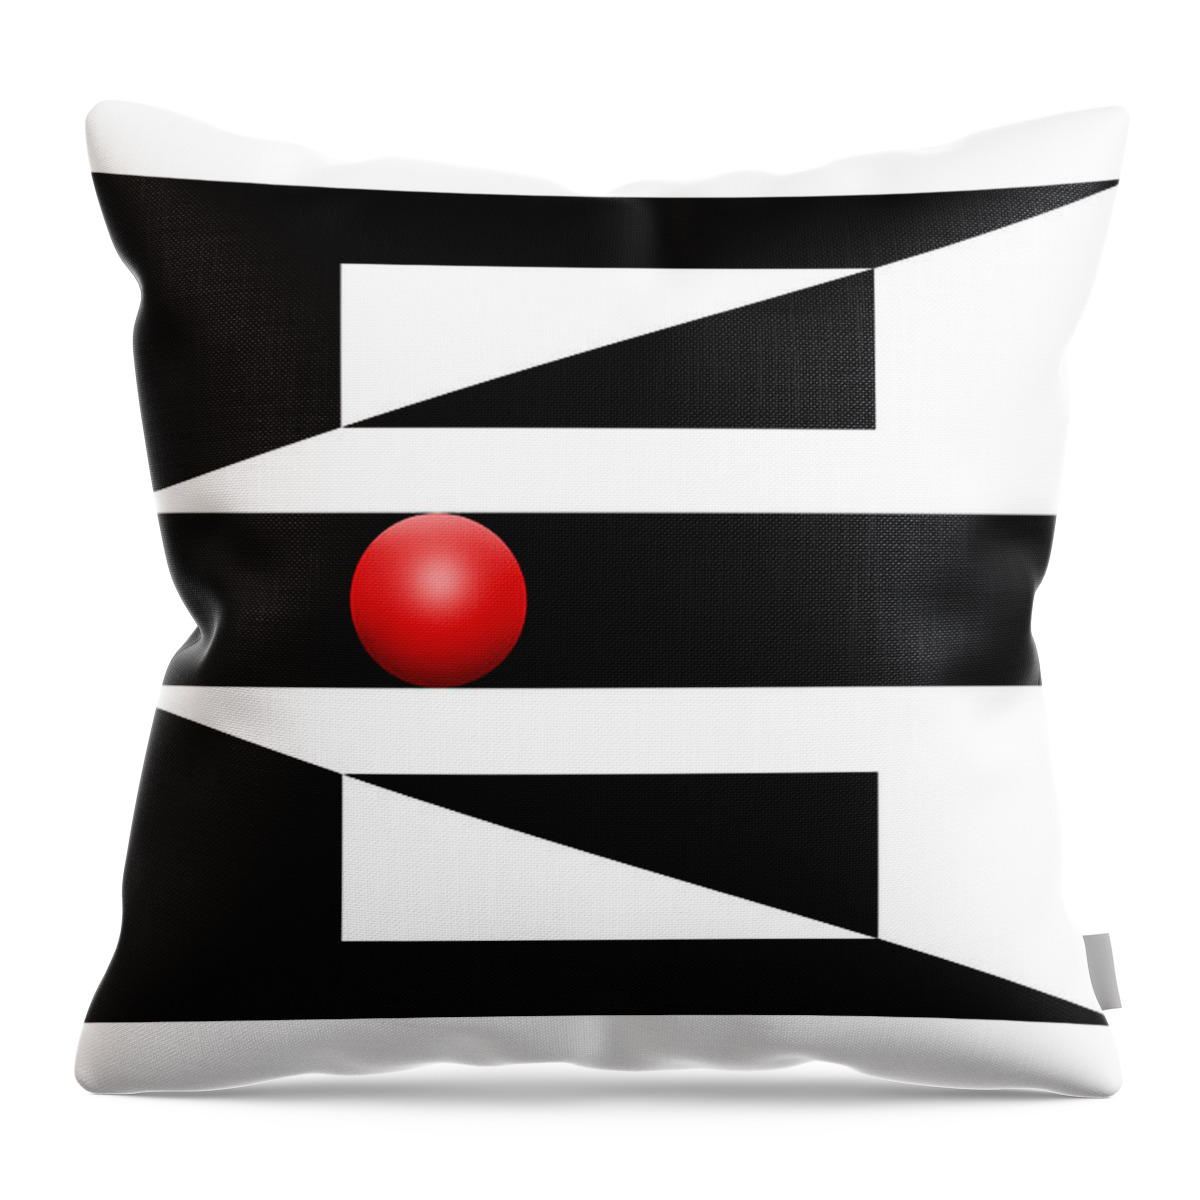 Abstract Throw Pillow featuring the digital art Red Ball 3 by Mike McGlothlen